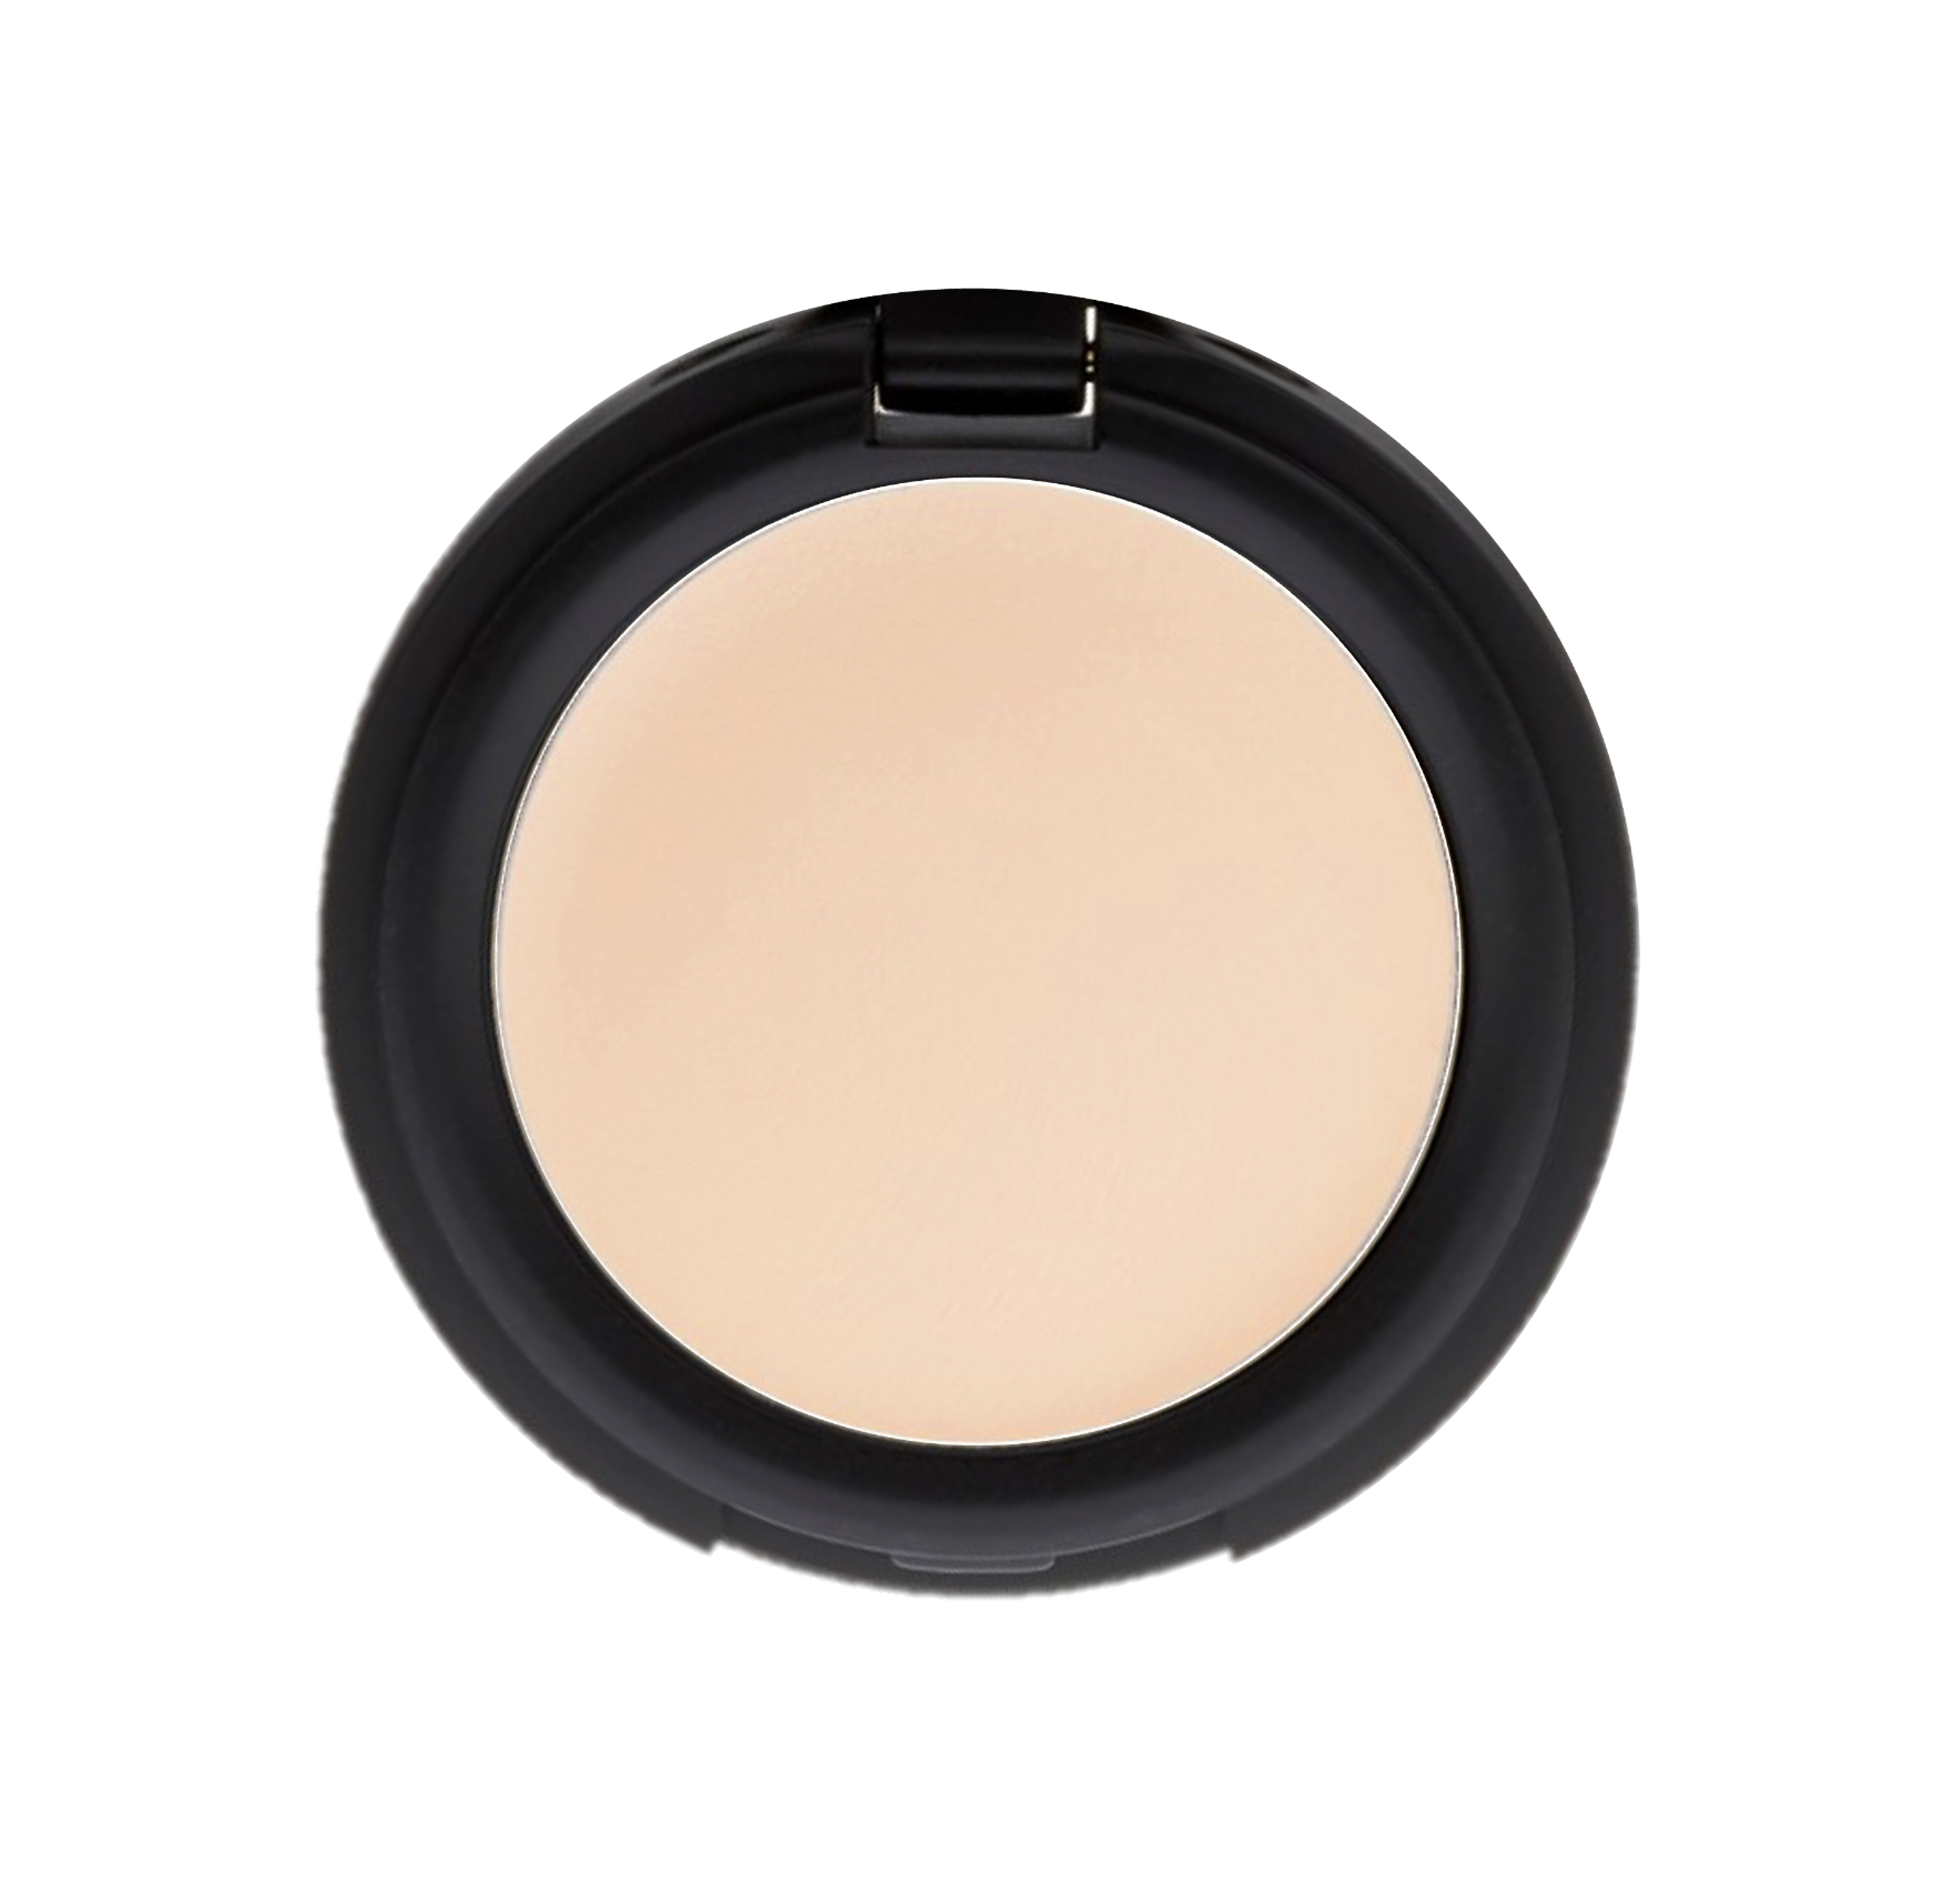 Adaptive Concealing Cream: Dewy, Medium to Full Coverage - Without Mica, & More!